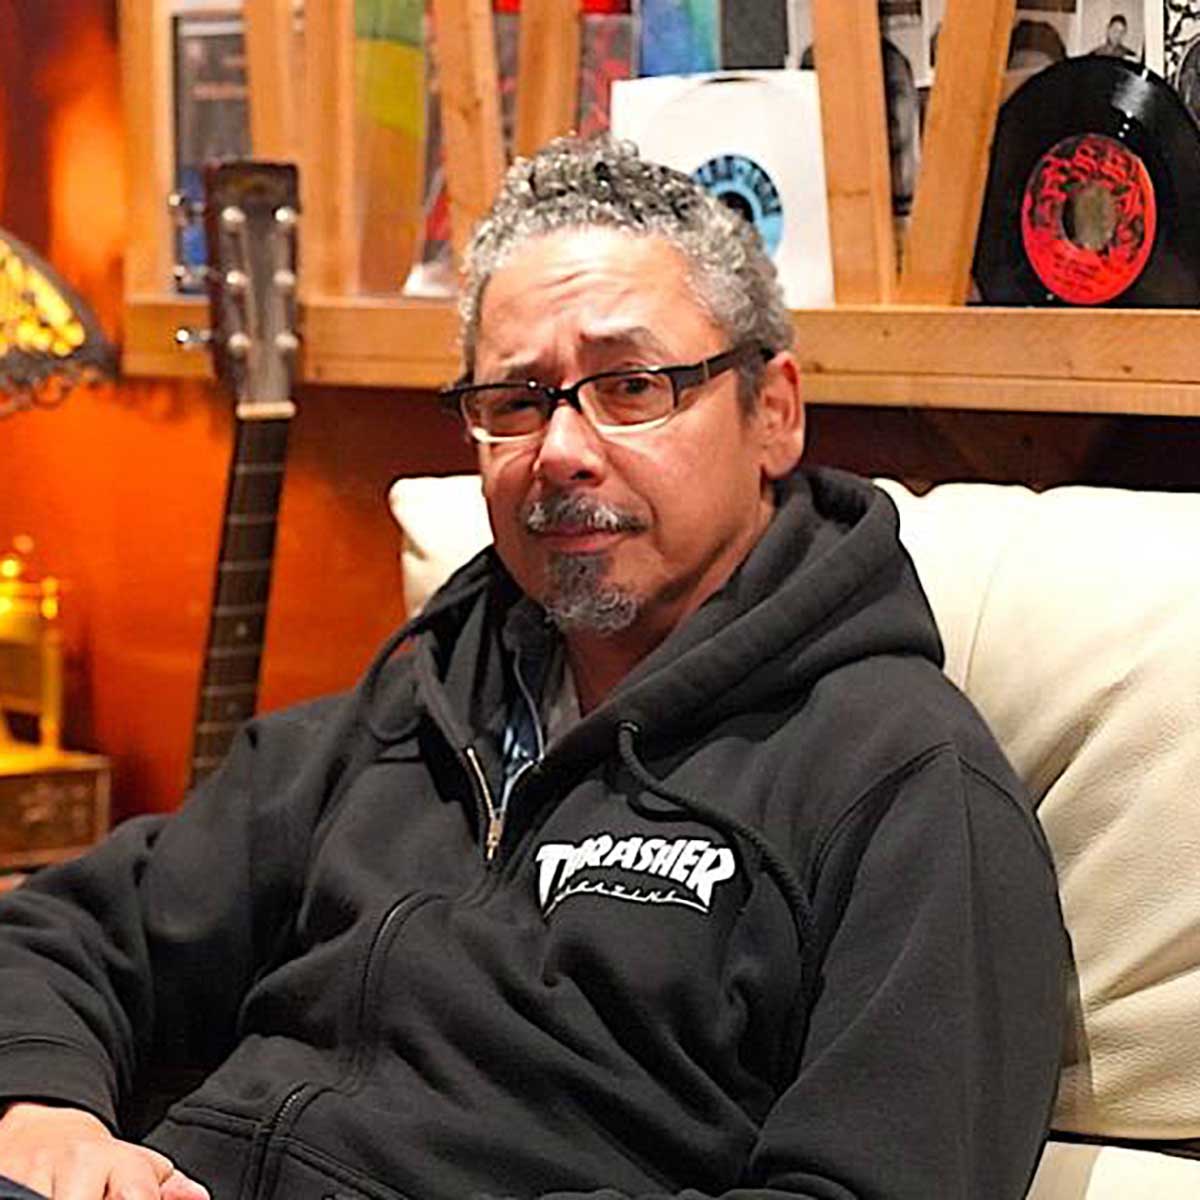 Profile image of Tommy Guerrero